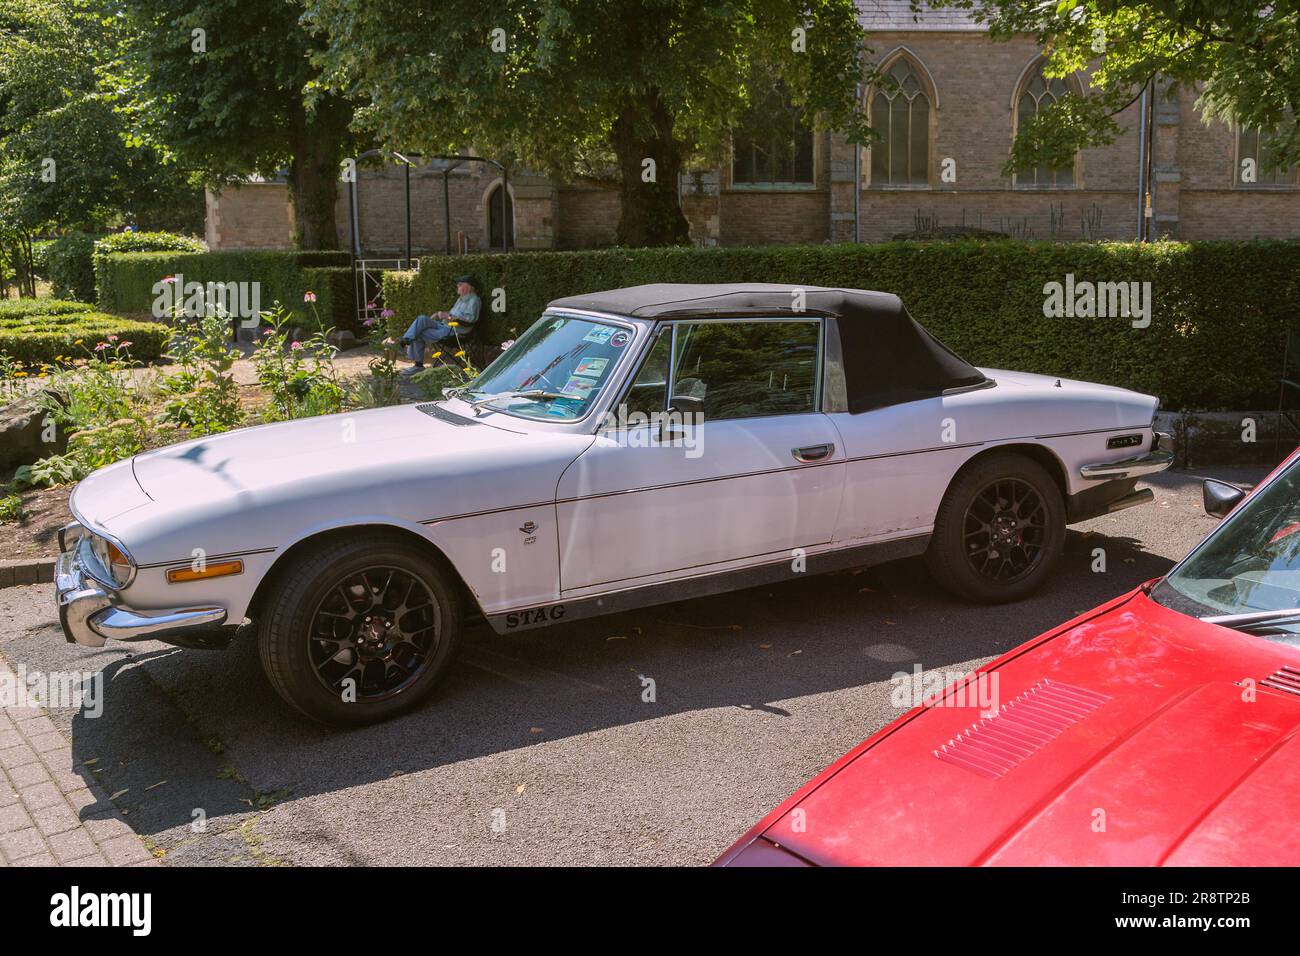 A white Triumph Stag, a 2+2 sports tourer which was sold between 1970 and 1978 by the Triumph Motor Company, a British car and motor manufacturer. Stock Photo